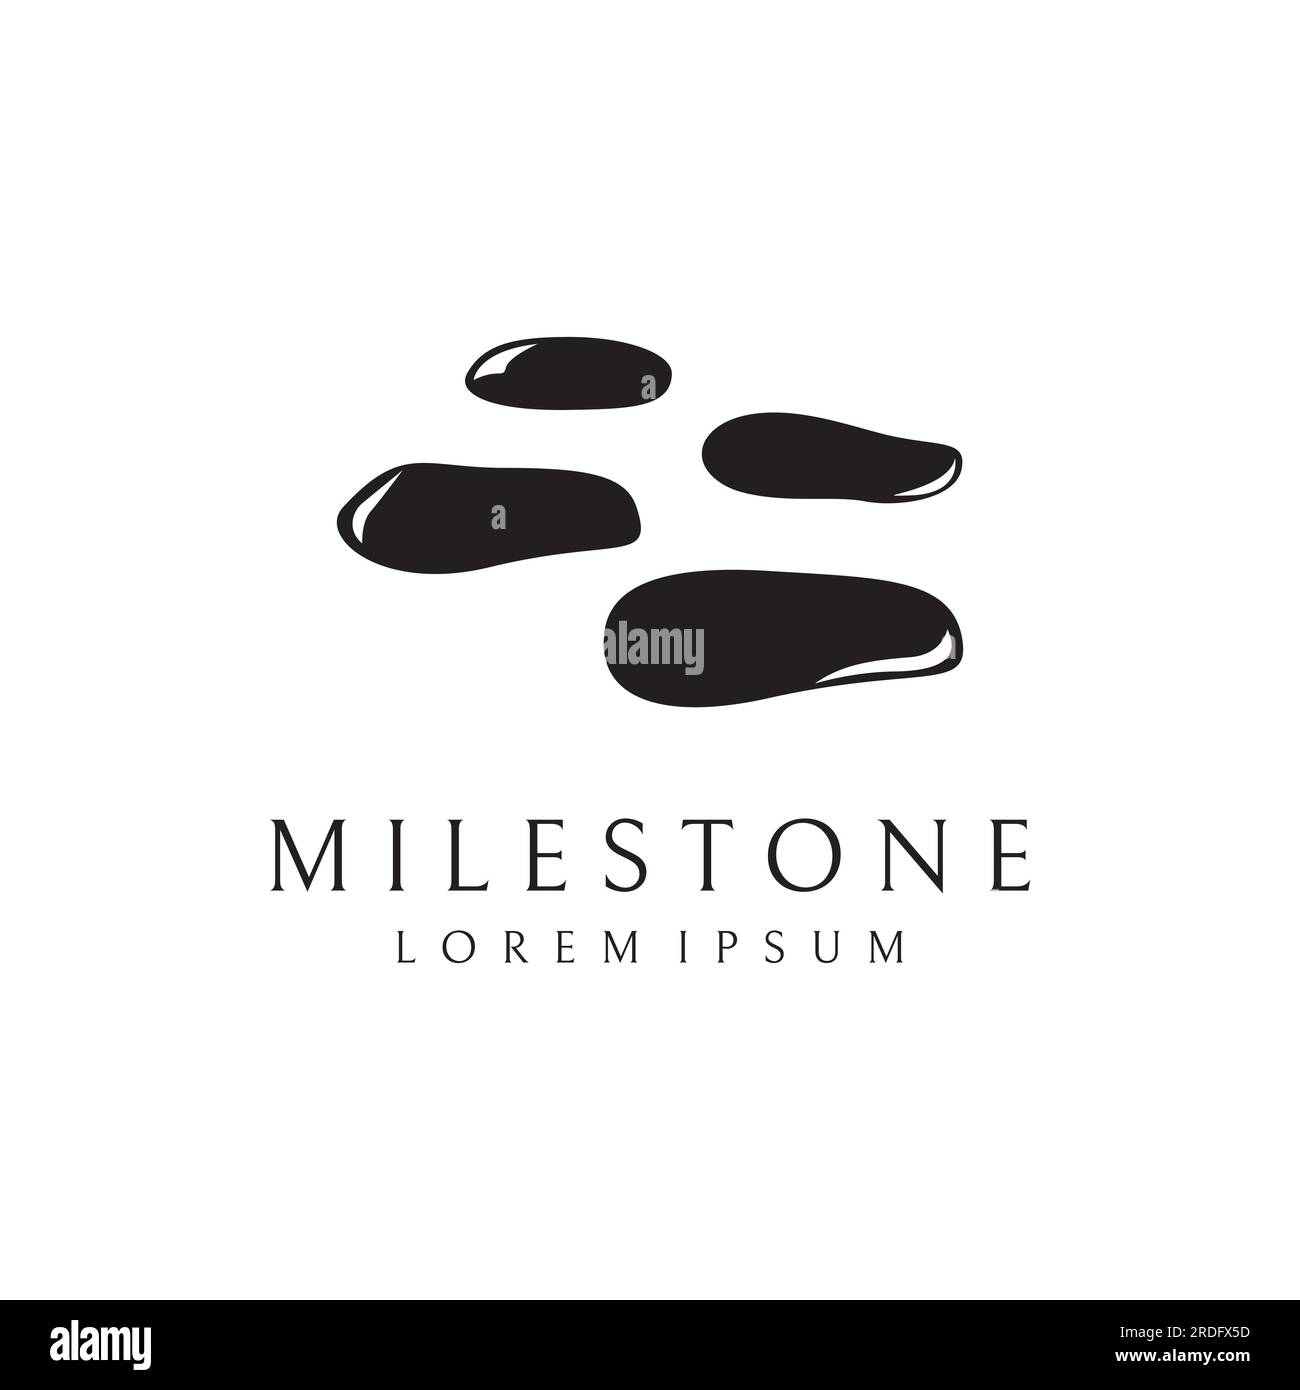 A stepping stone or walking stone logo. Stock Vector